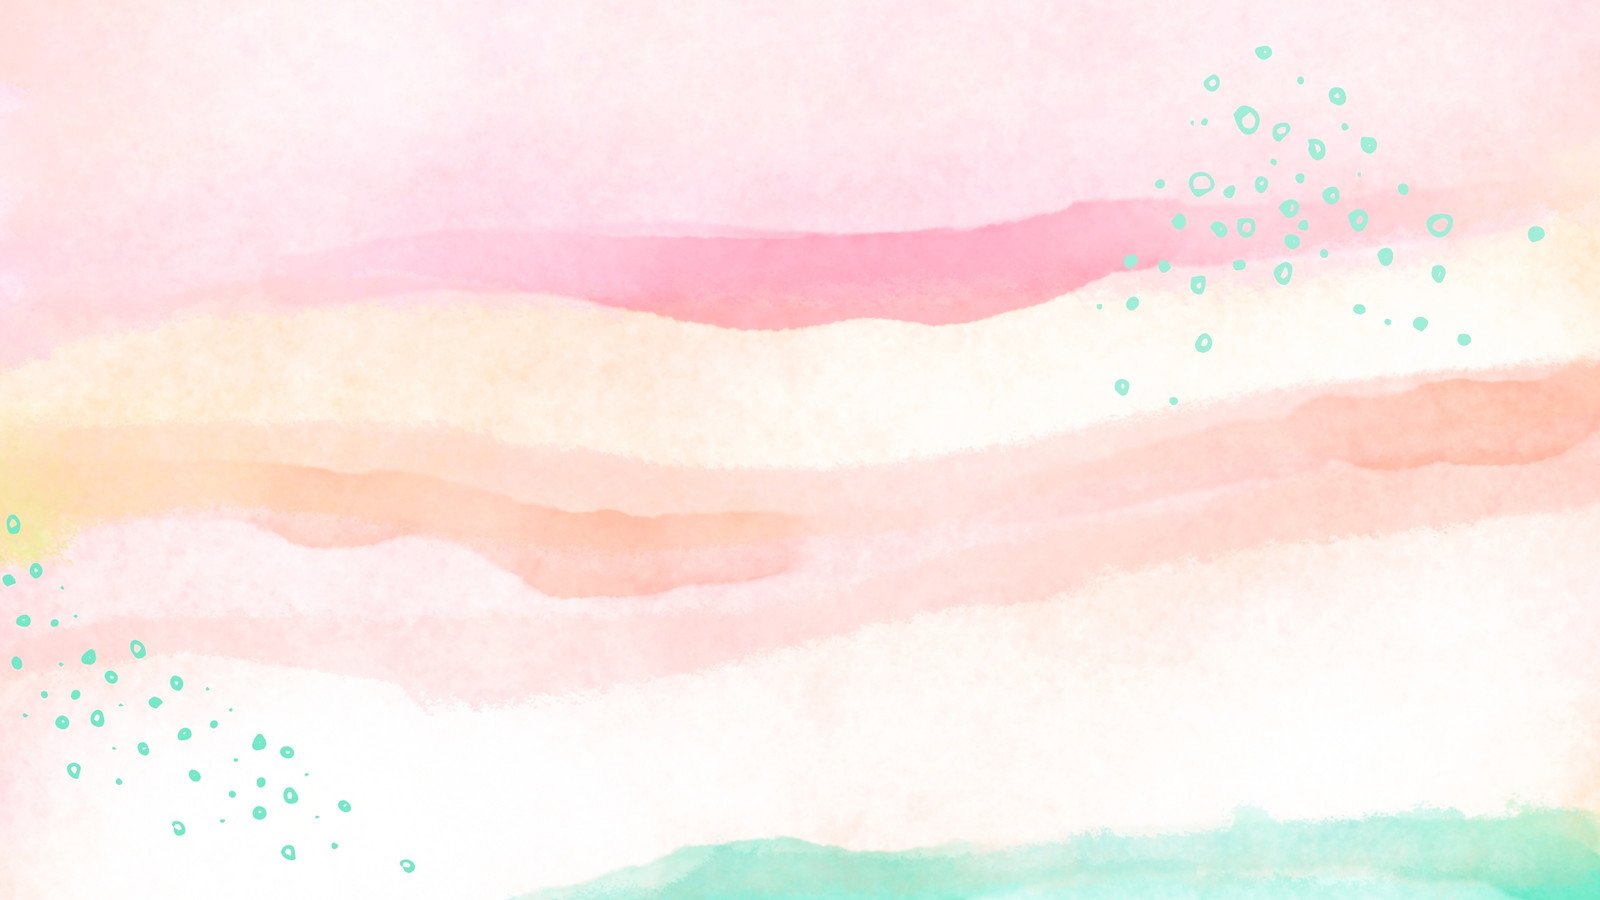 Free and customizable watercolor background templates